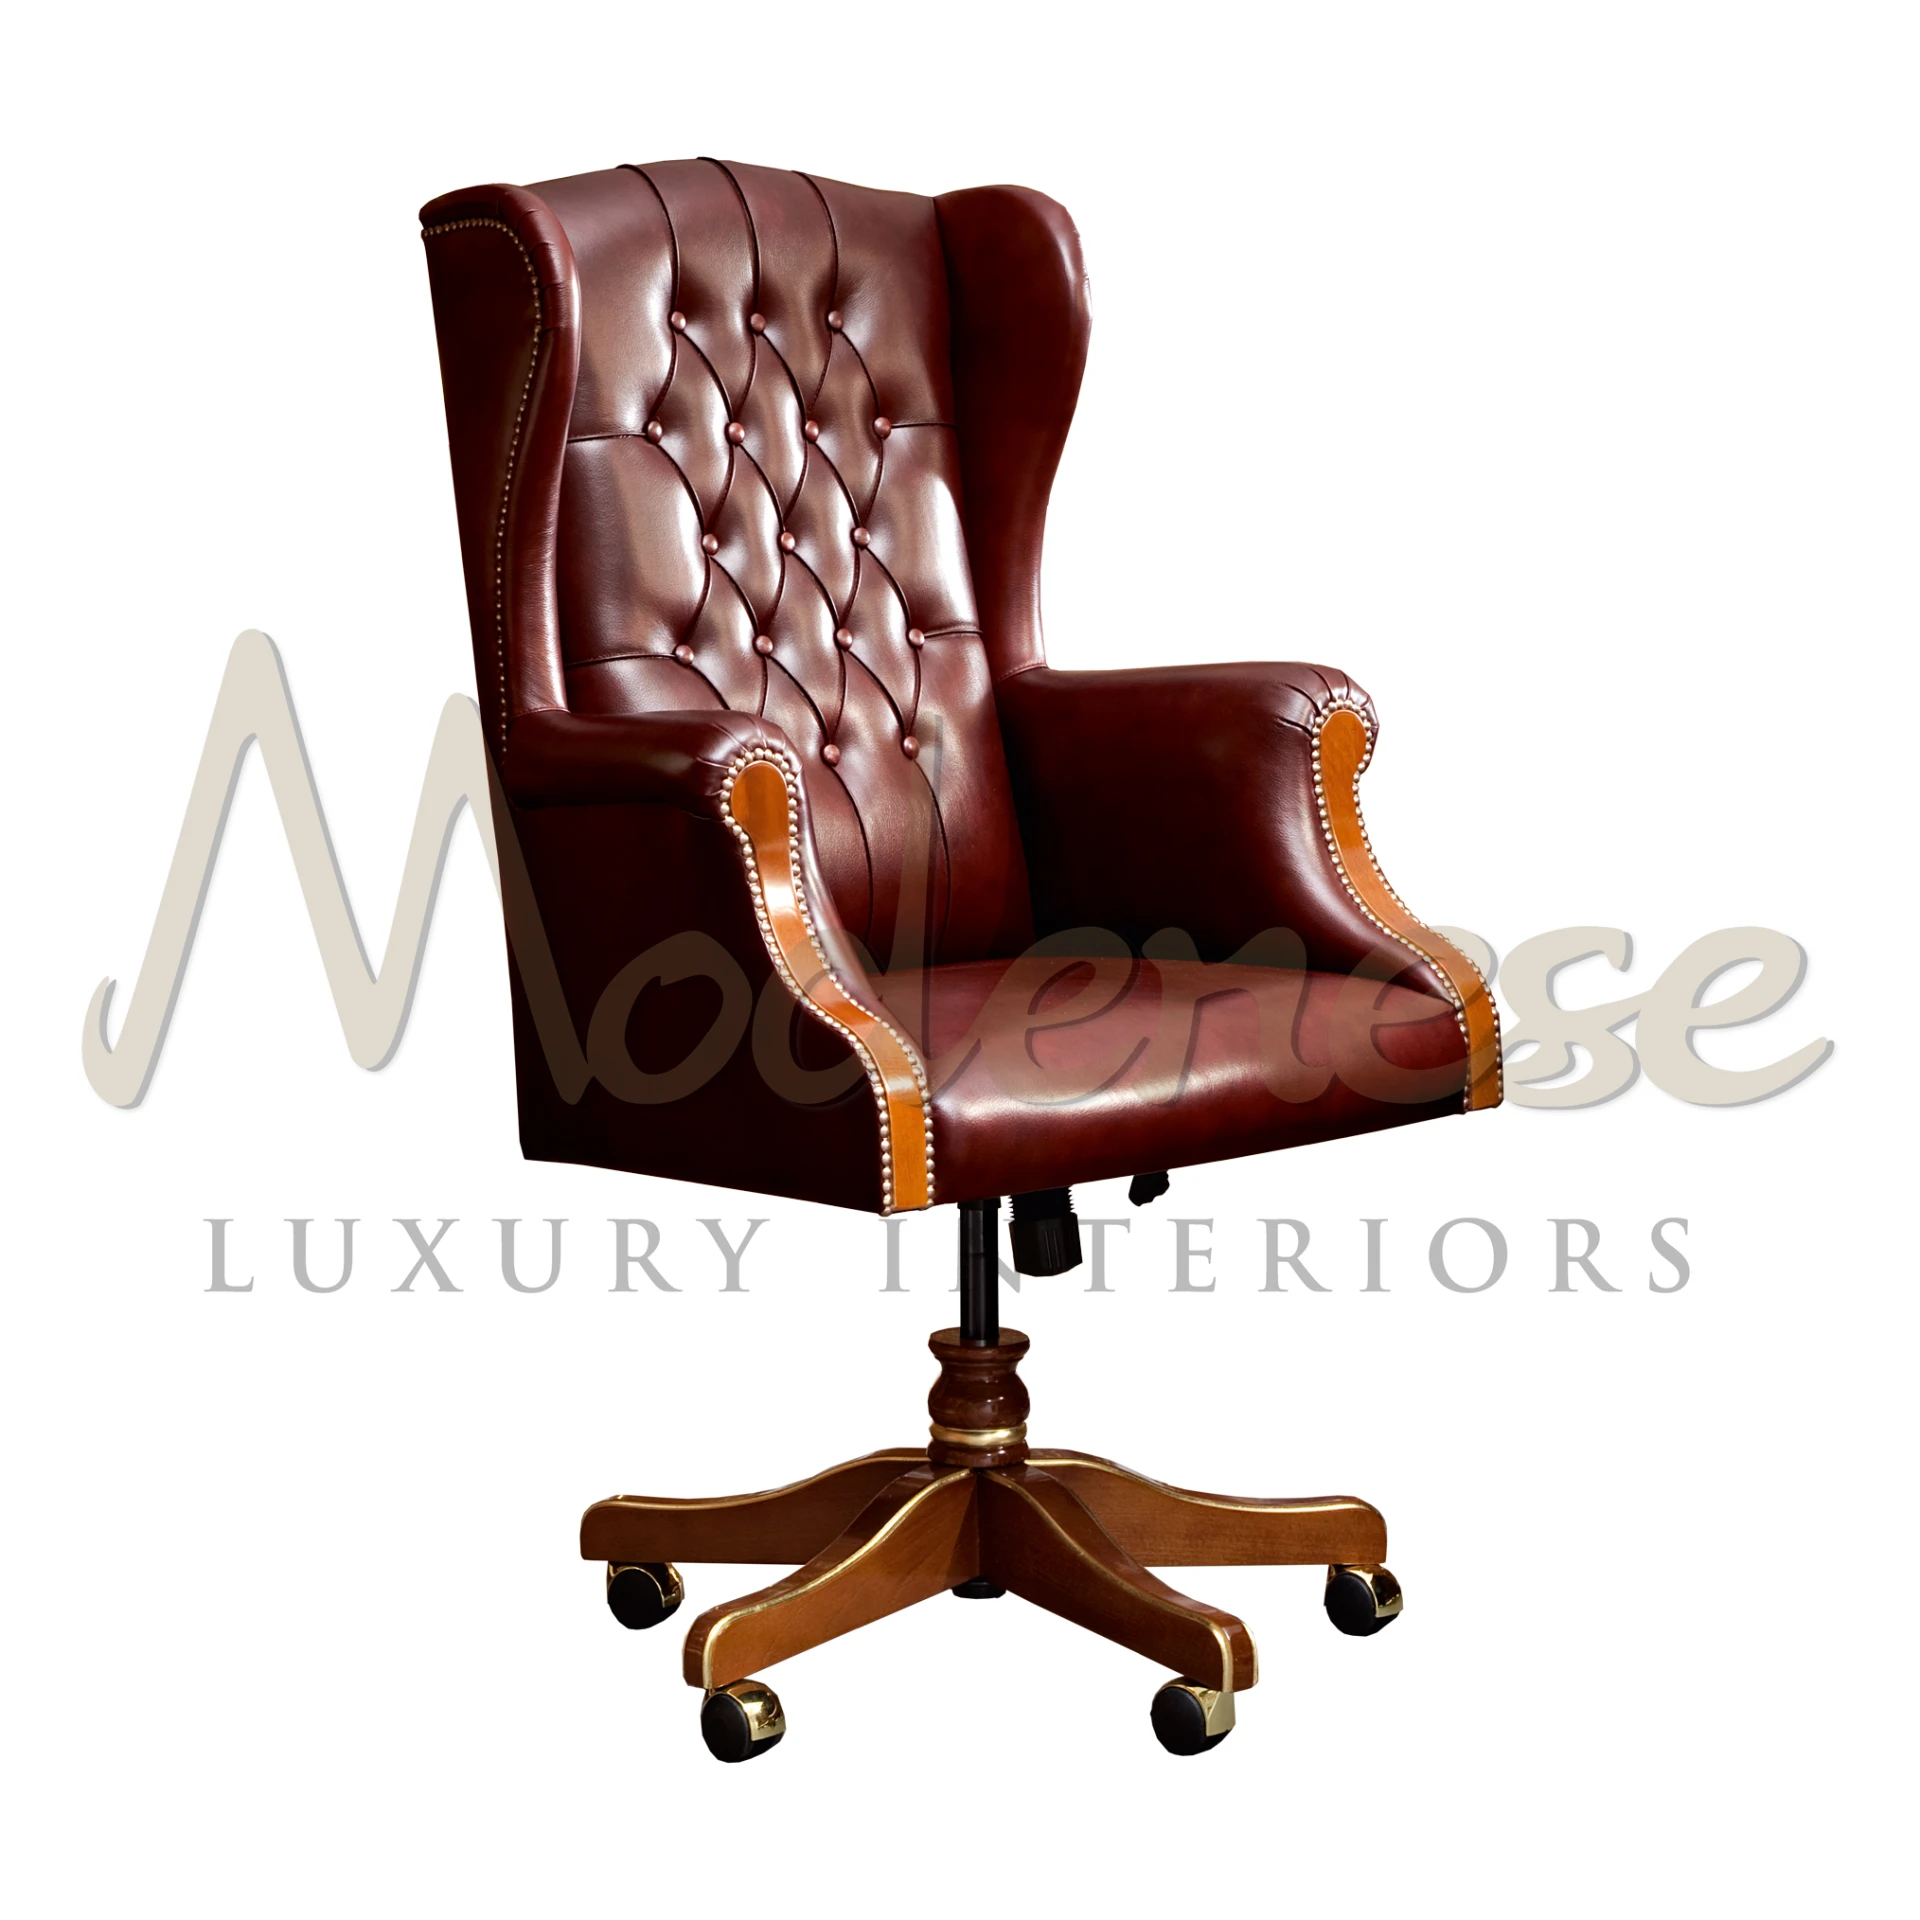 Product View with Clear Background - President Office Armchair - leather office chair with a wooden base